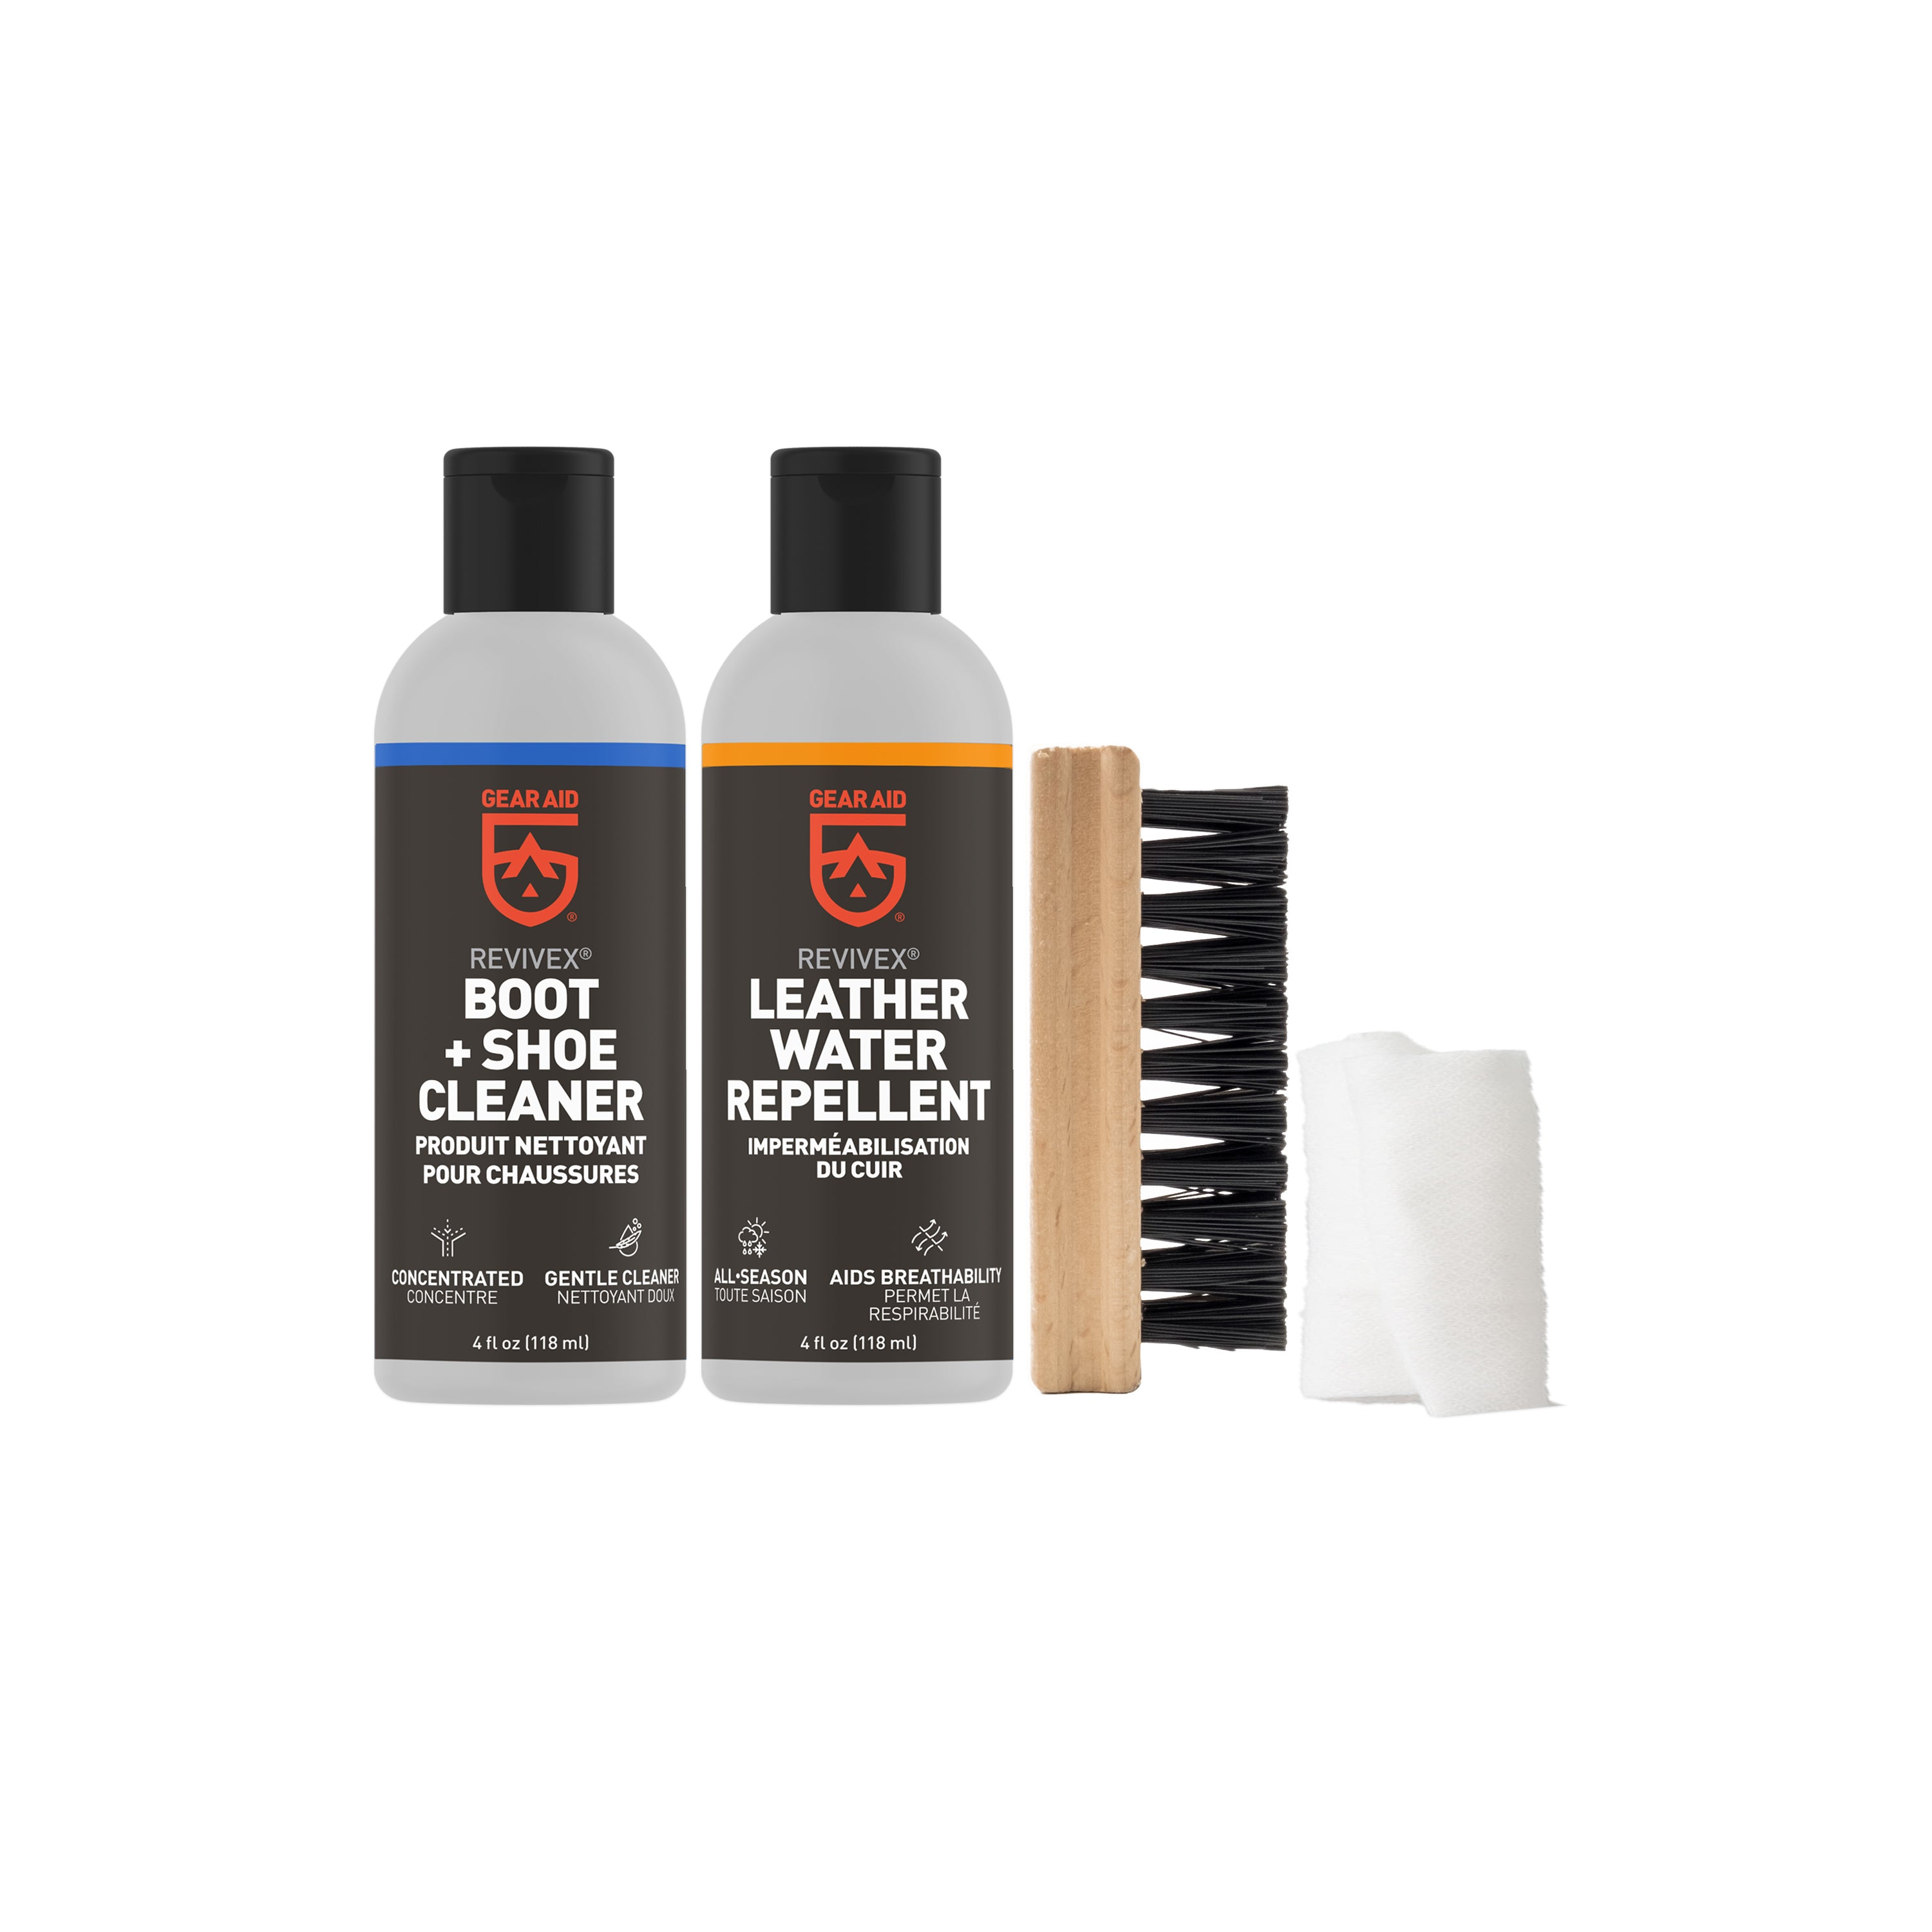 Revivex Leather Boot Care Kit | GEAR AID